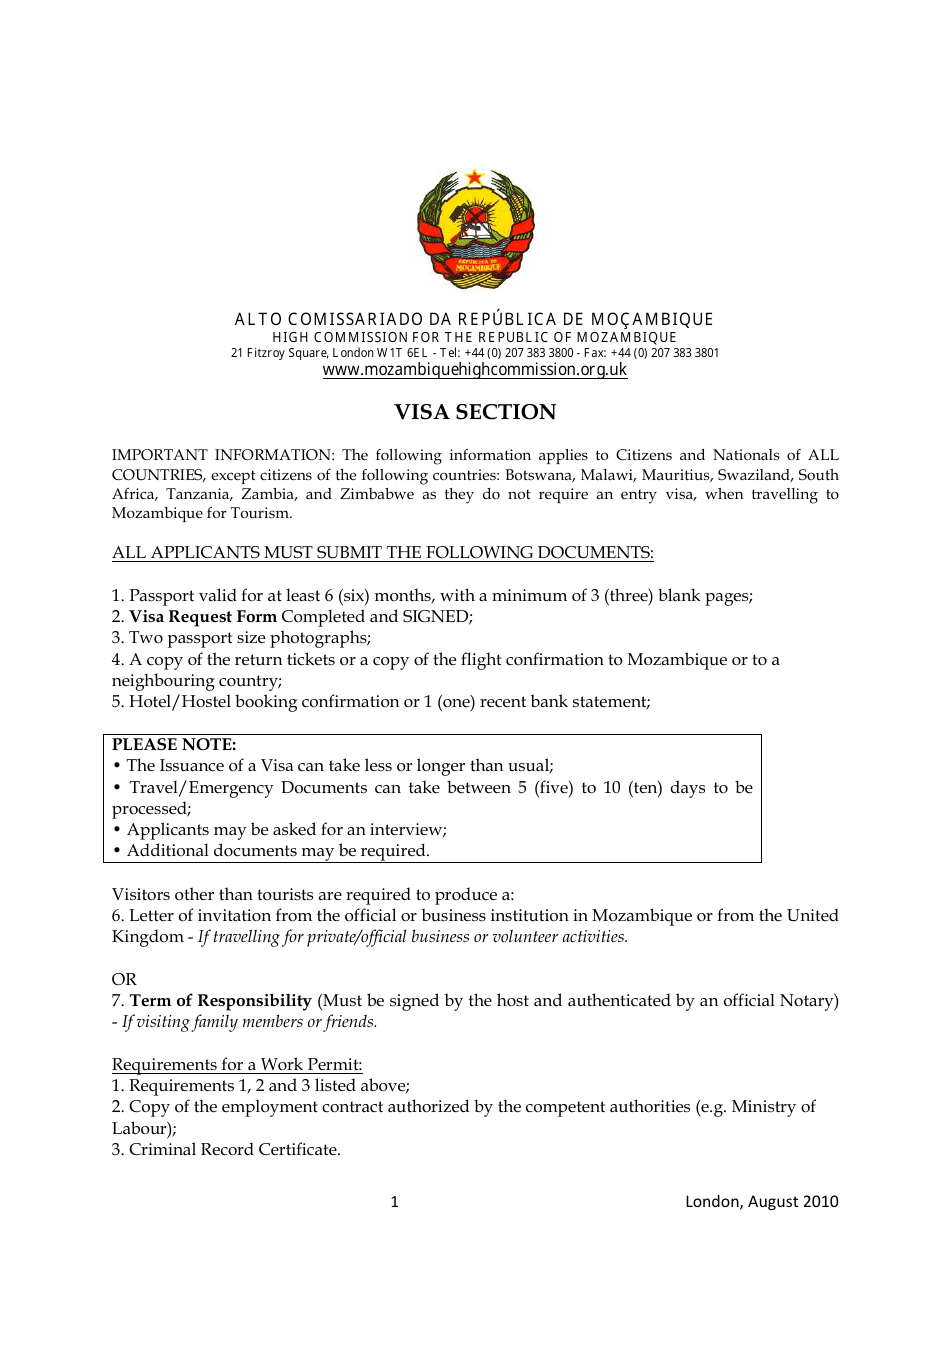 Mozambique Visa Application Form - High Commission for the Republic of Mozambique - London, Greater London, United Kingdom (English / Spanish), Page 1